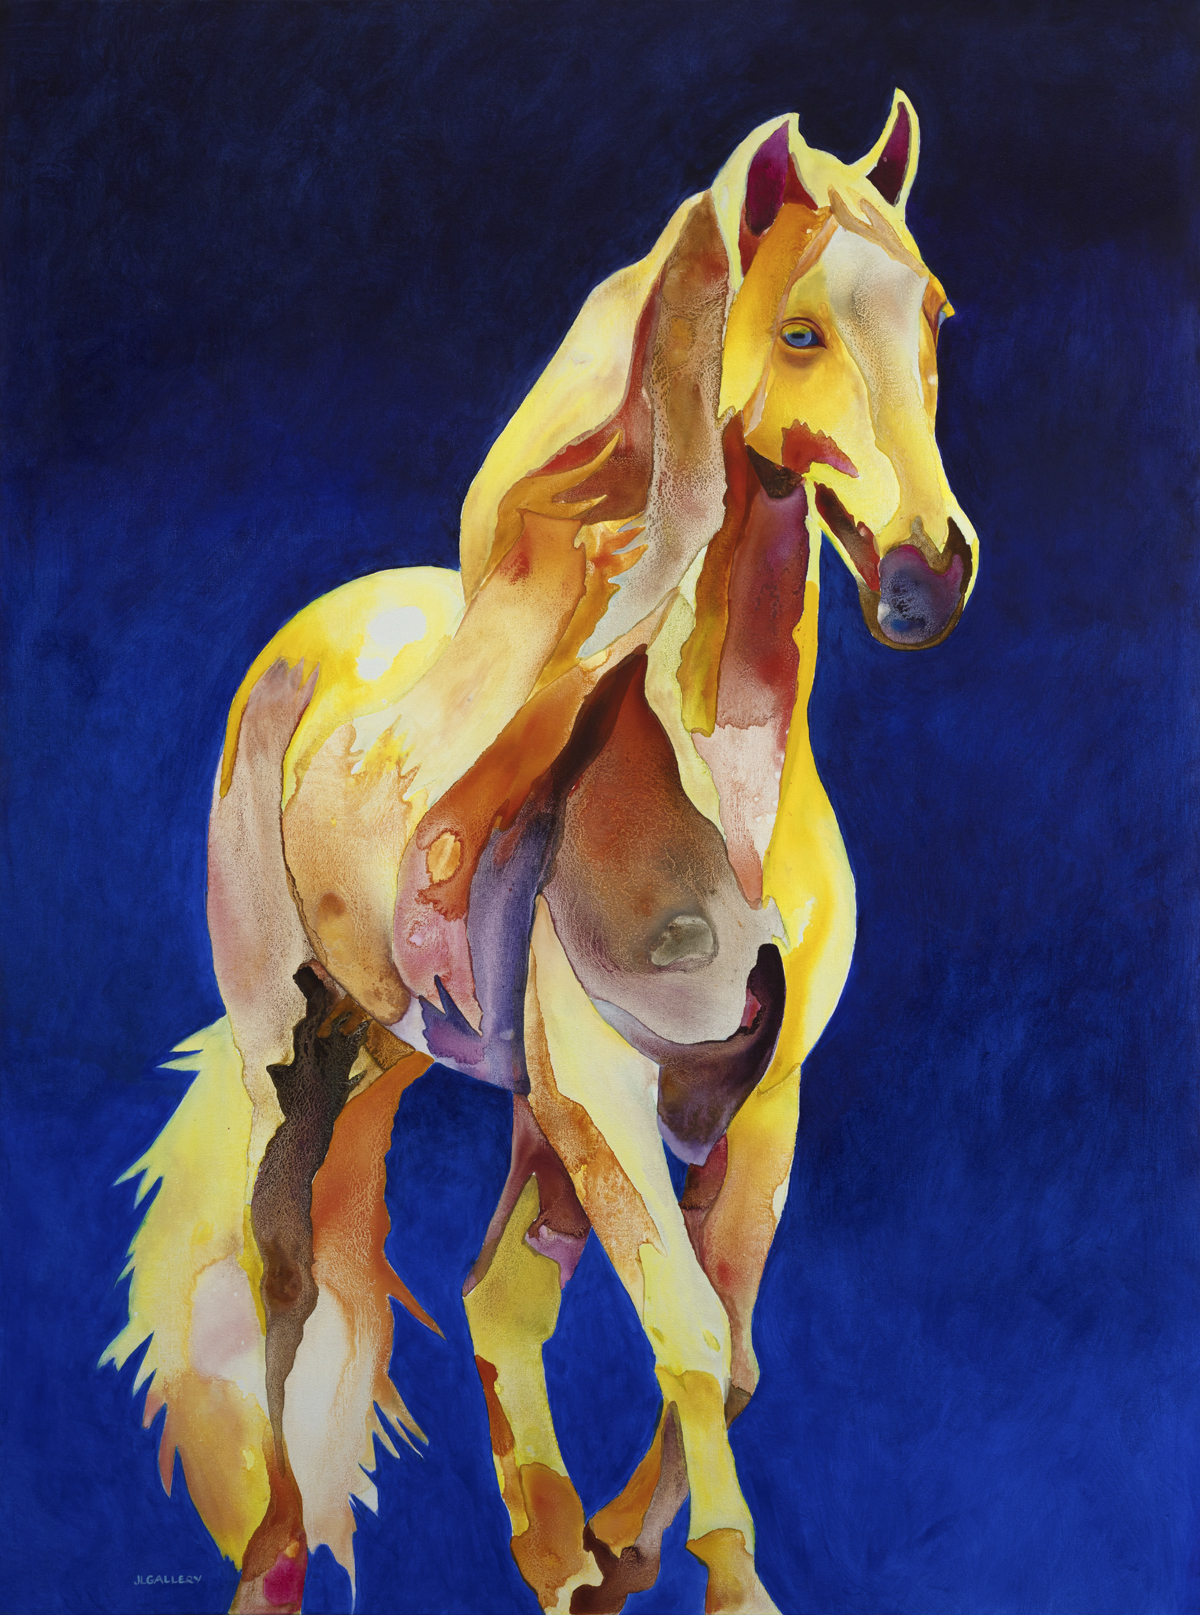 Winona is a 48x36" painting of a yellow horse done in a watercolor technique. The background is dark blue.